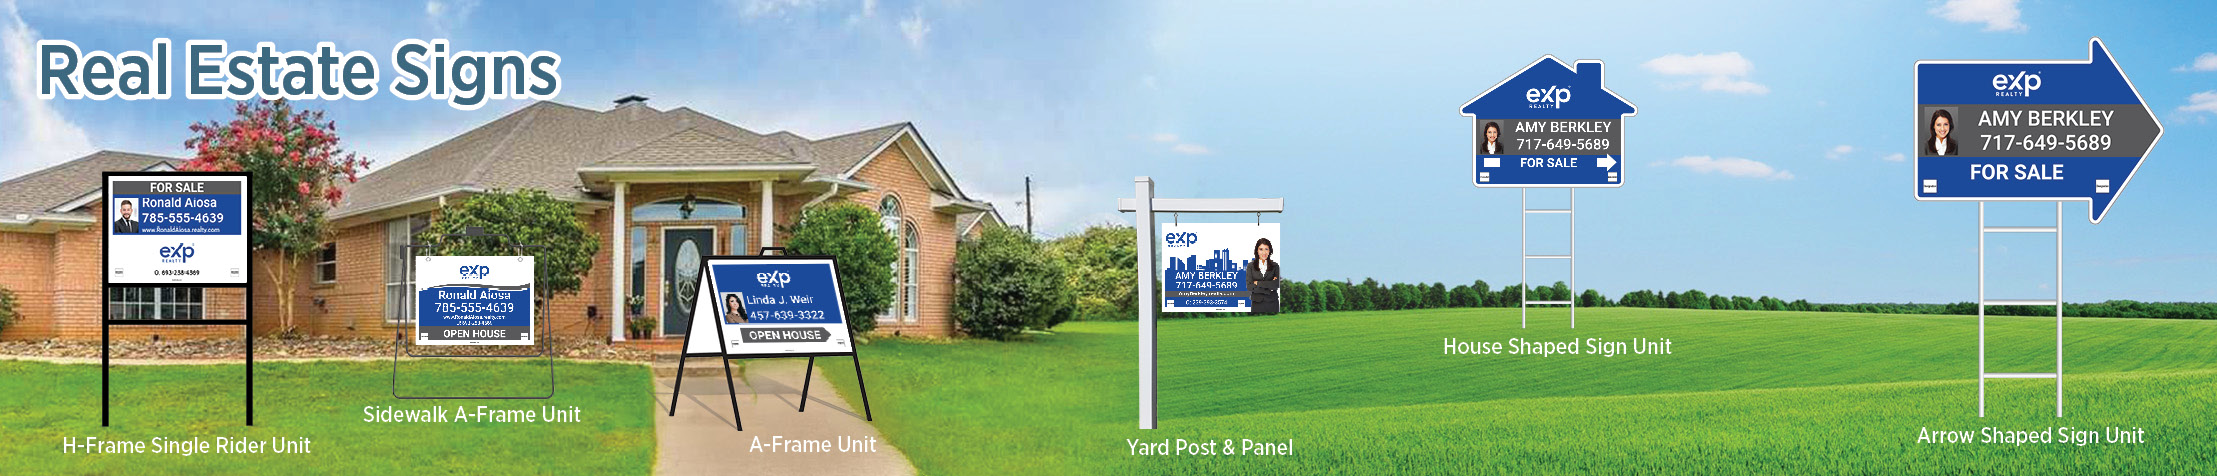 eXp Realty Real Estate Signs - eXp Realty  real estate signs - H-Frame Units, Directional Signs, A-Frame Units, Yard Post and Panel | BestPrintBuy.com